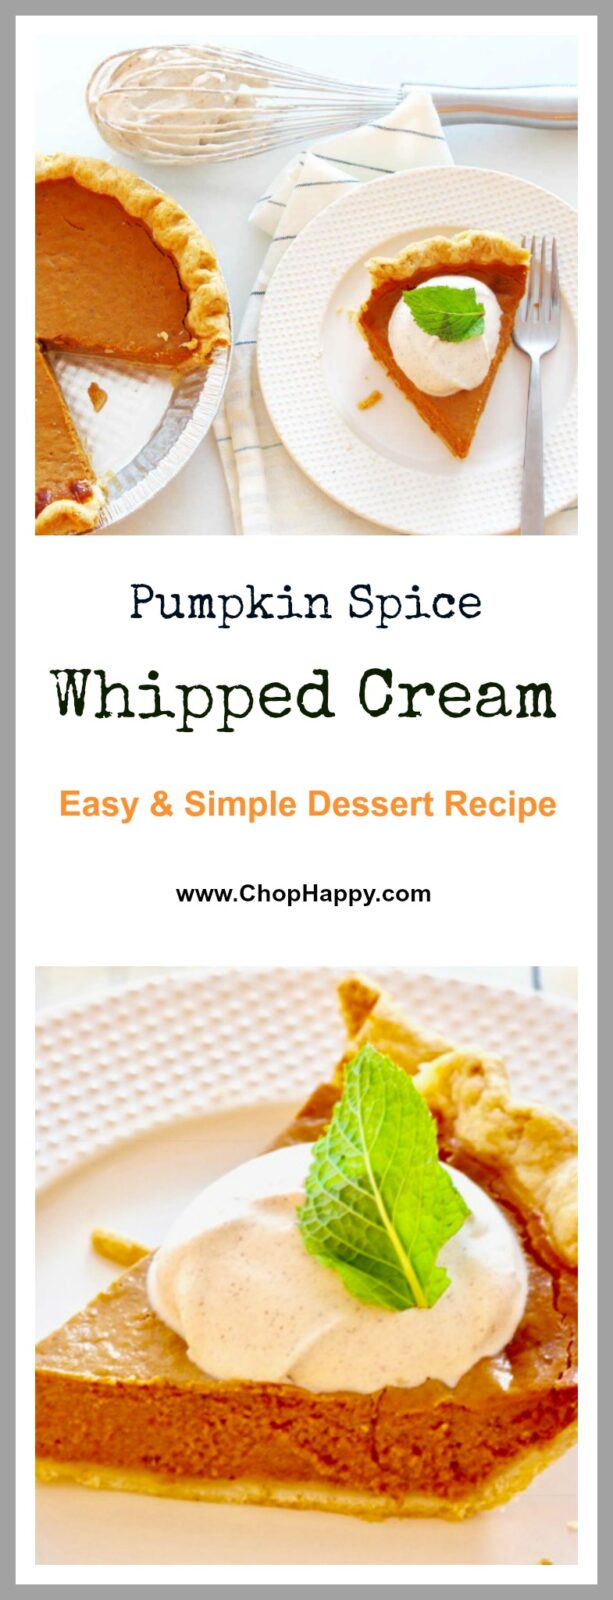 Pumpkin Spice Whipped Cream Recipe - is so easy and creamy fun on pie, ice-cream, or any dessert. This will get you your pumpkin spice fix. www.ChopHappy.com